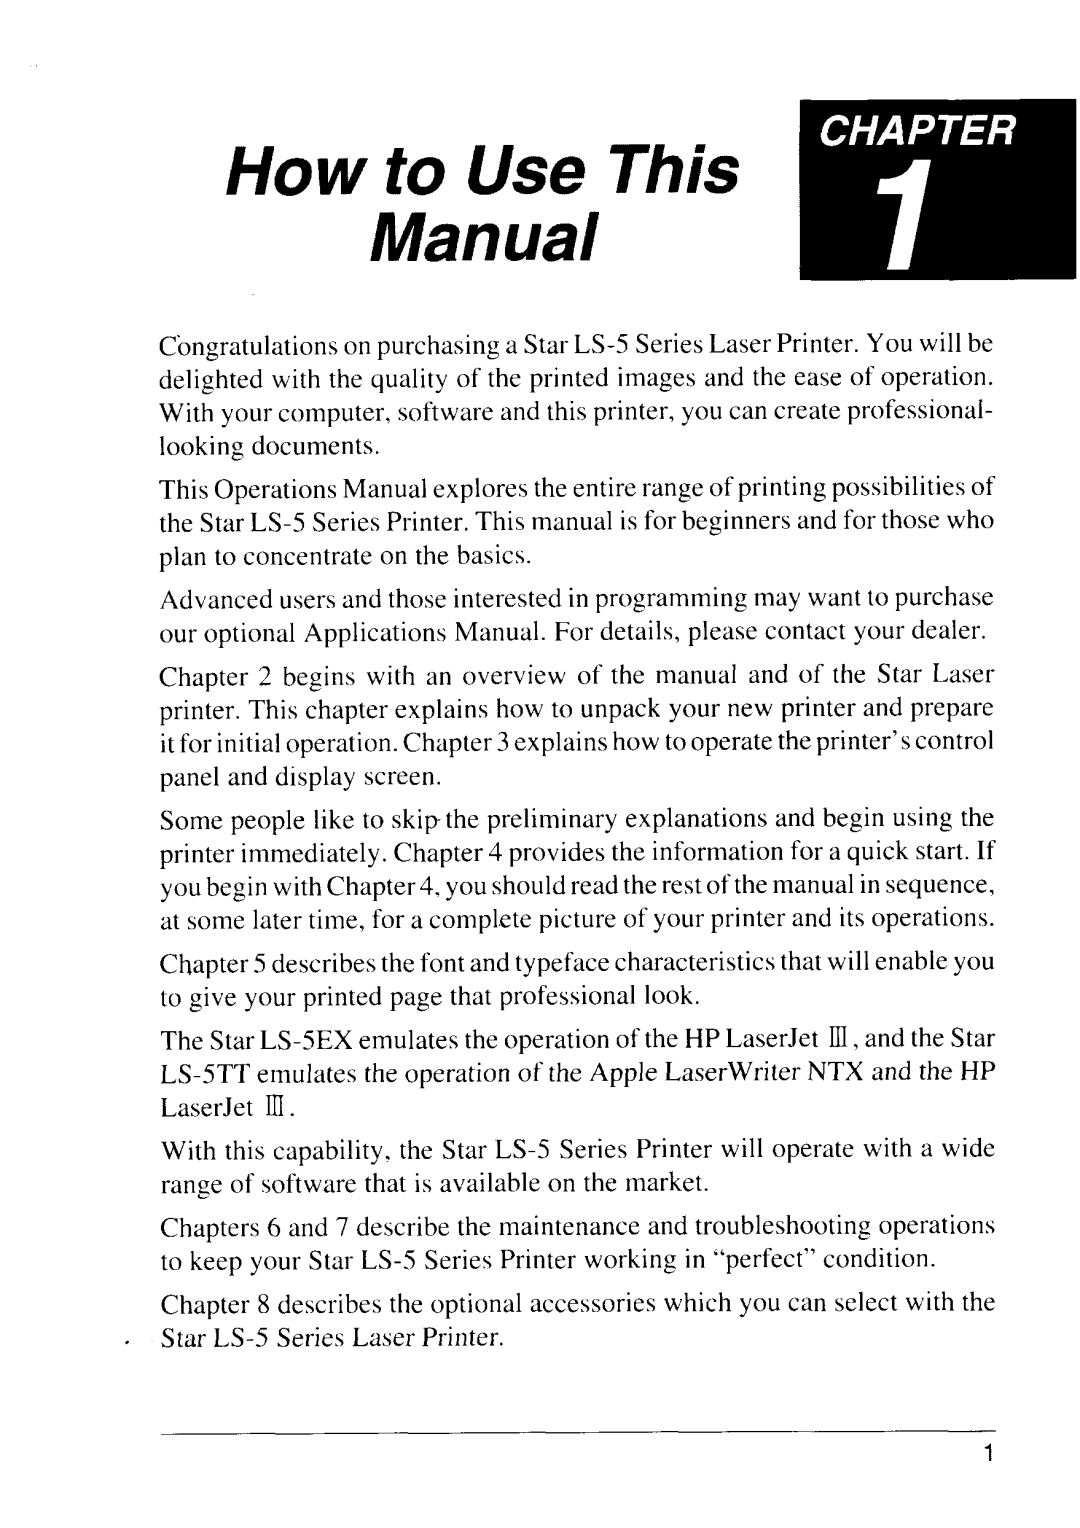 Star Micronics LS-5 TT, LS-5 EX operation manual Manual, How to Use This m‘” “ 